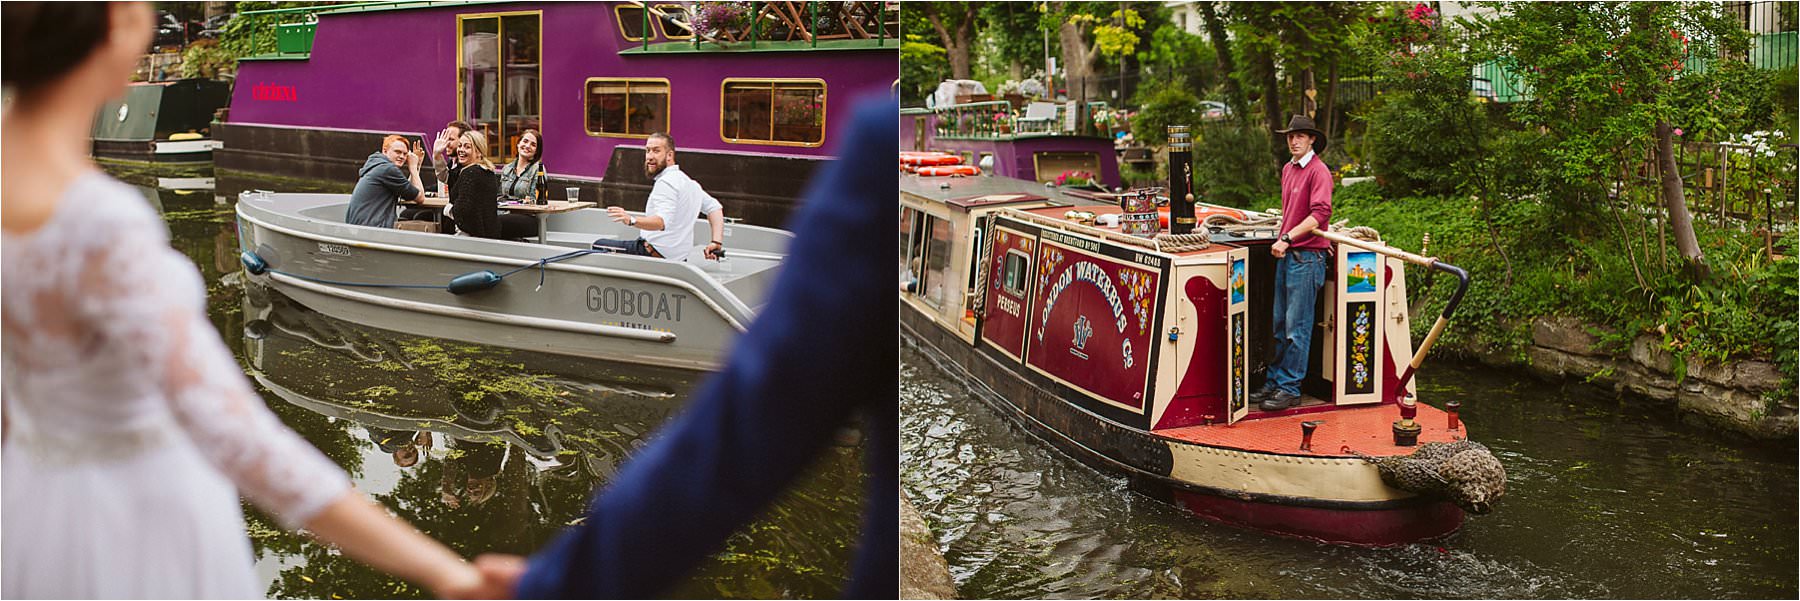 barges on a canal in Little venice wedding